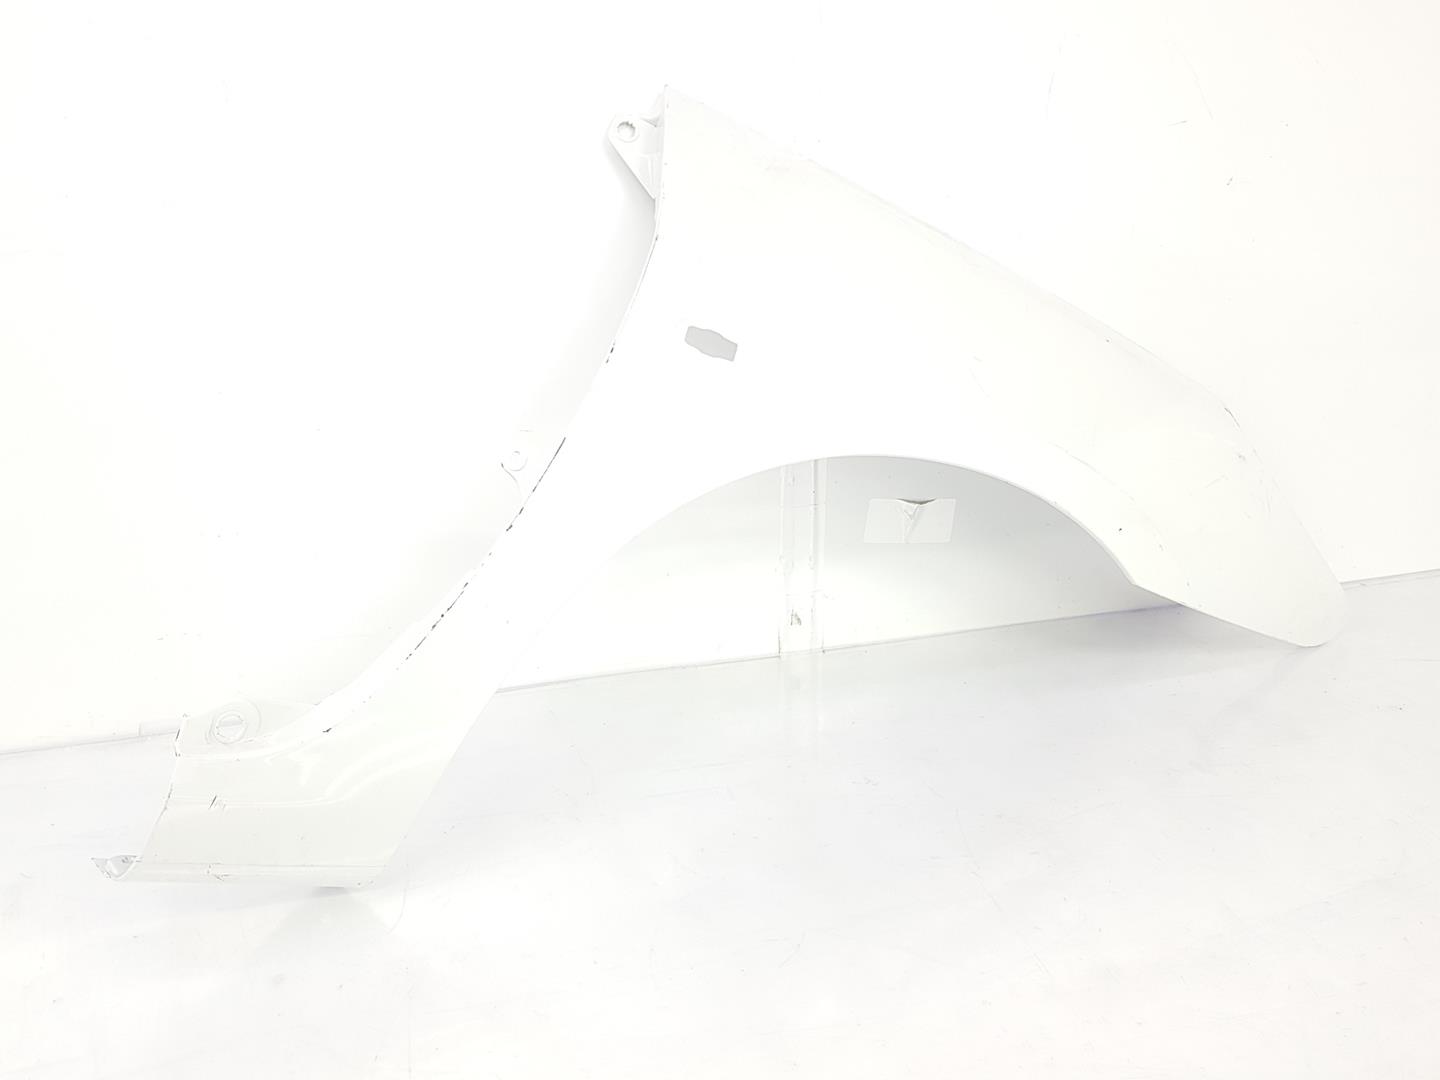 PEUGEOT 307 1 generation (2001-2008) Front Right Fender 7841N7, 7841N7, COLORBLANCO 19793900